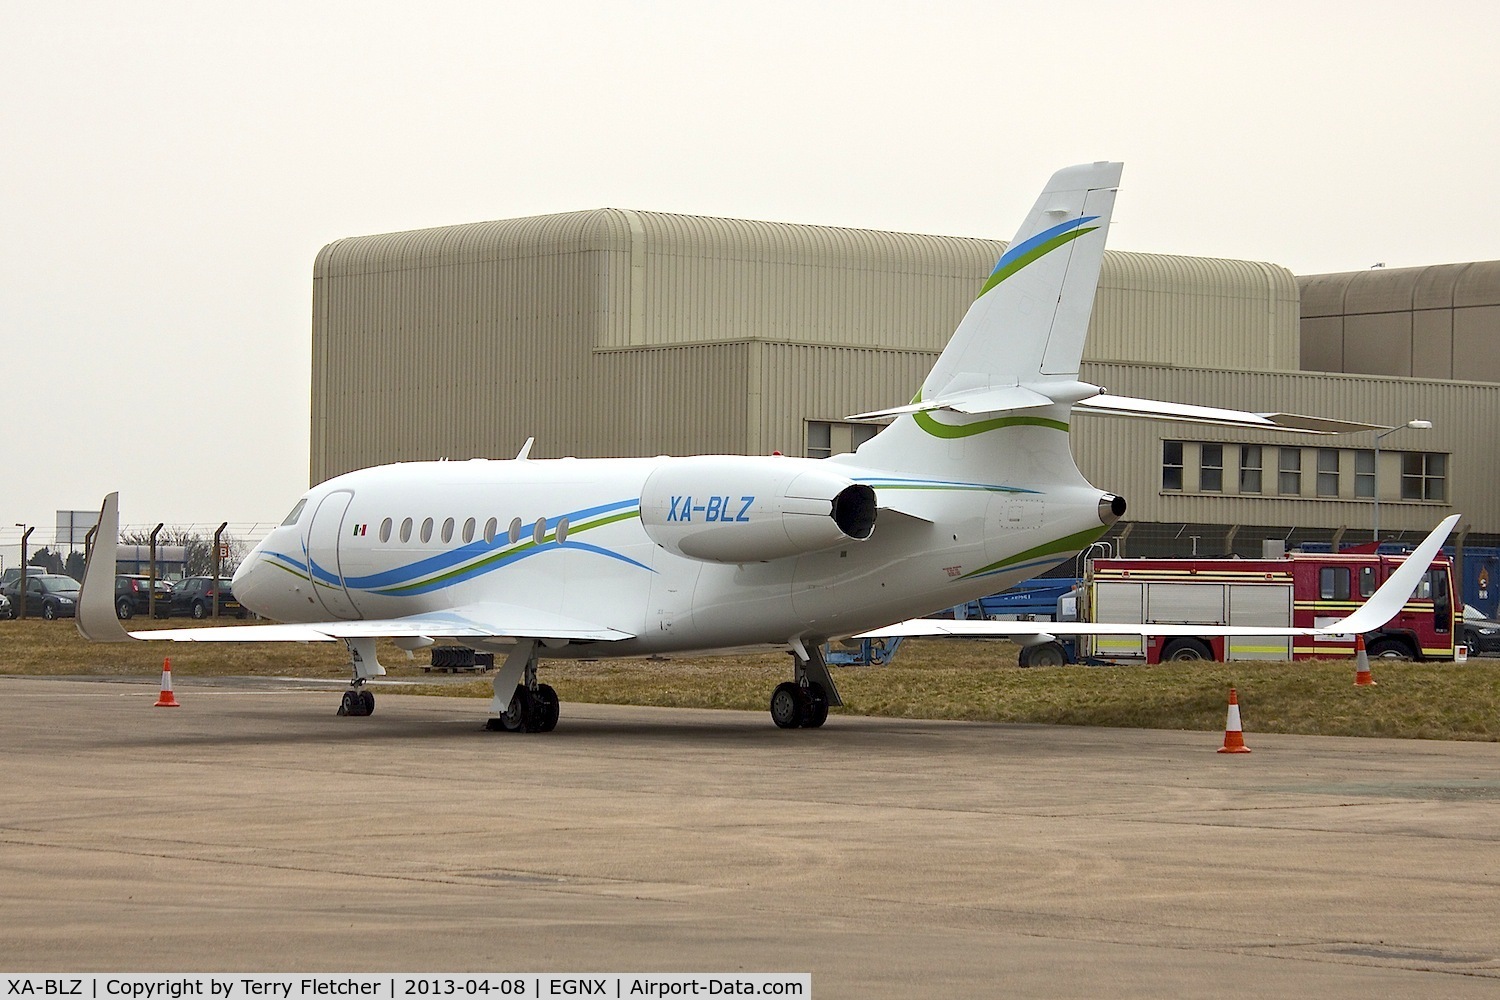 XA-BLZ, 2013 Dassault Falcon 2000LX C/N 251, Mexican registered Dassault Falcon 2000LX, c/n: 251 -
not too many Mexican registered bizjets have visited East Midlands !!!!